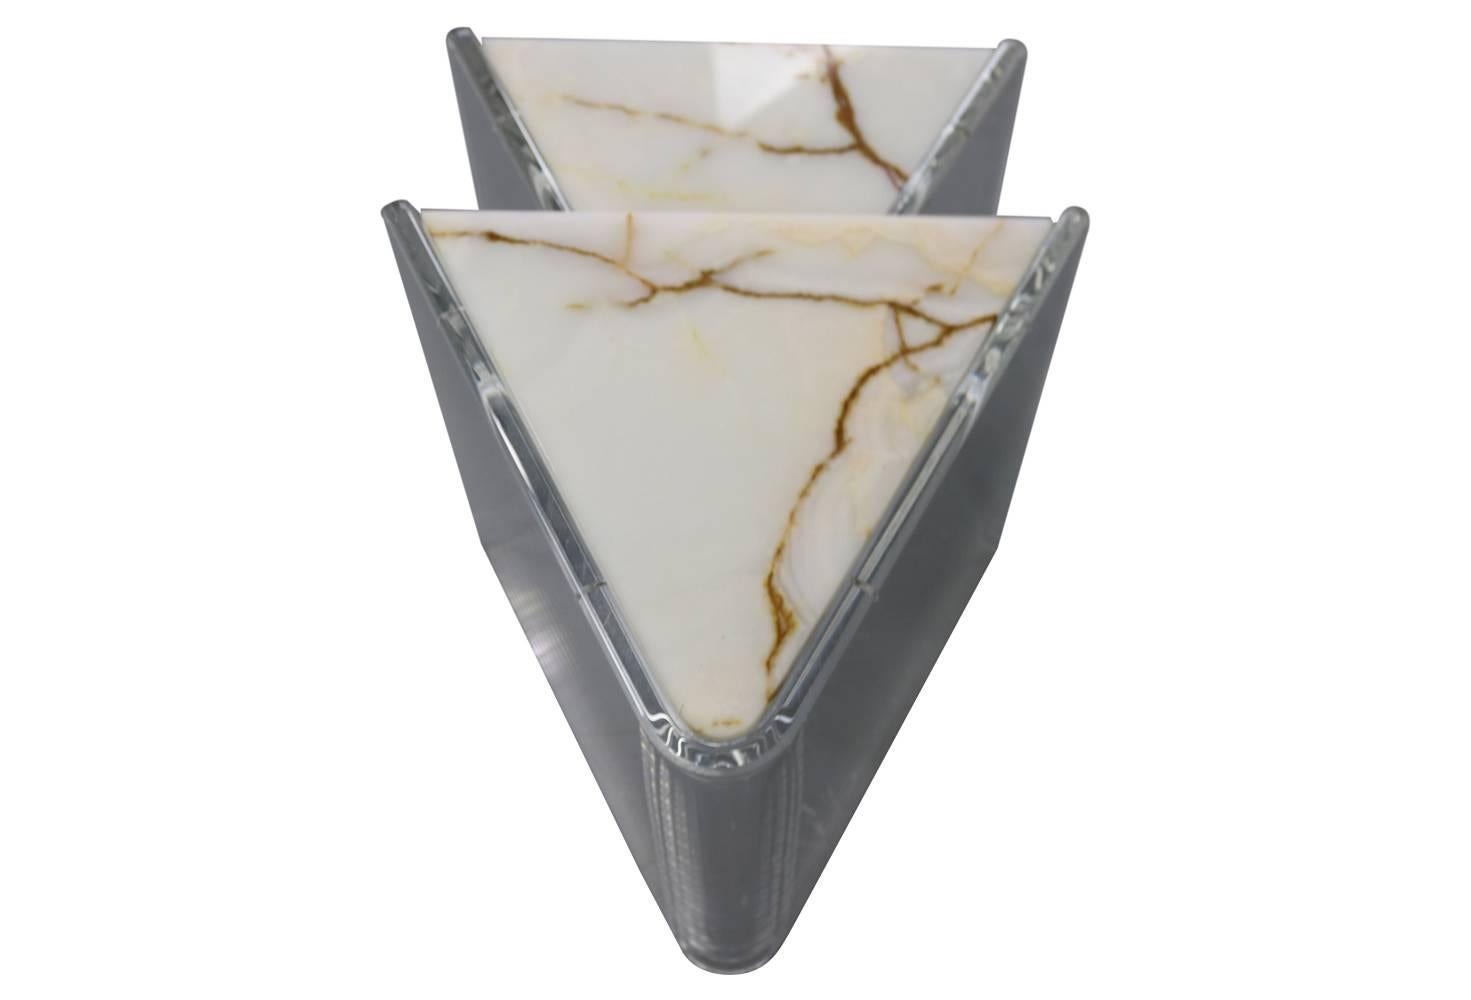 Pair of exquisite geometric stacking tables in marble and Lucite. White marble with caramel brown veining.